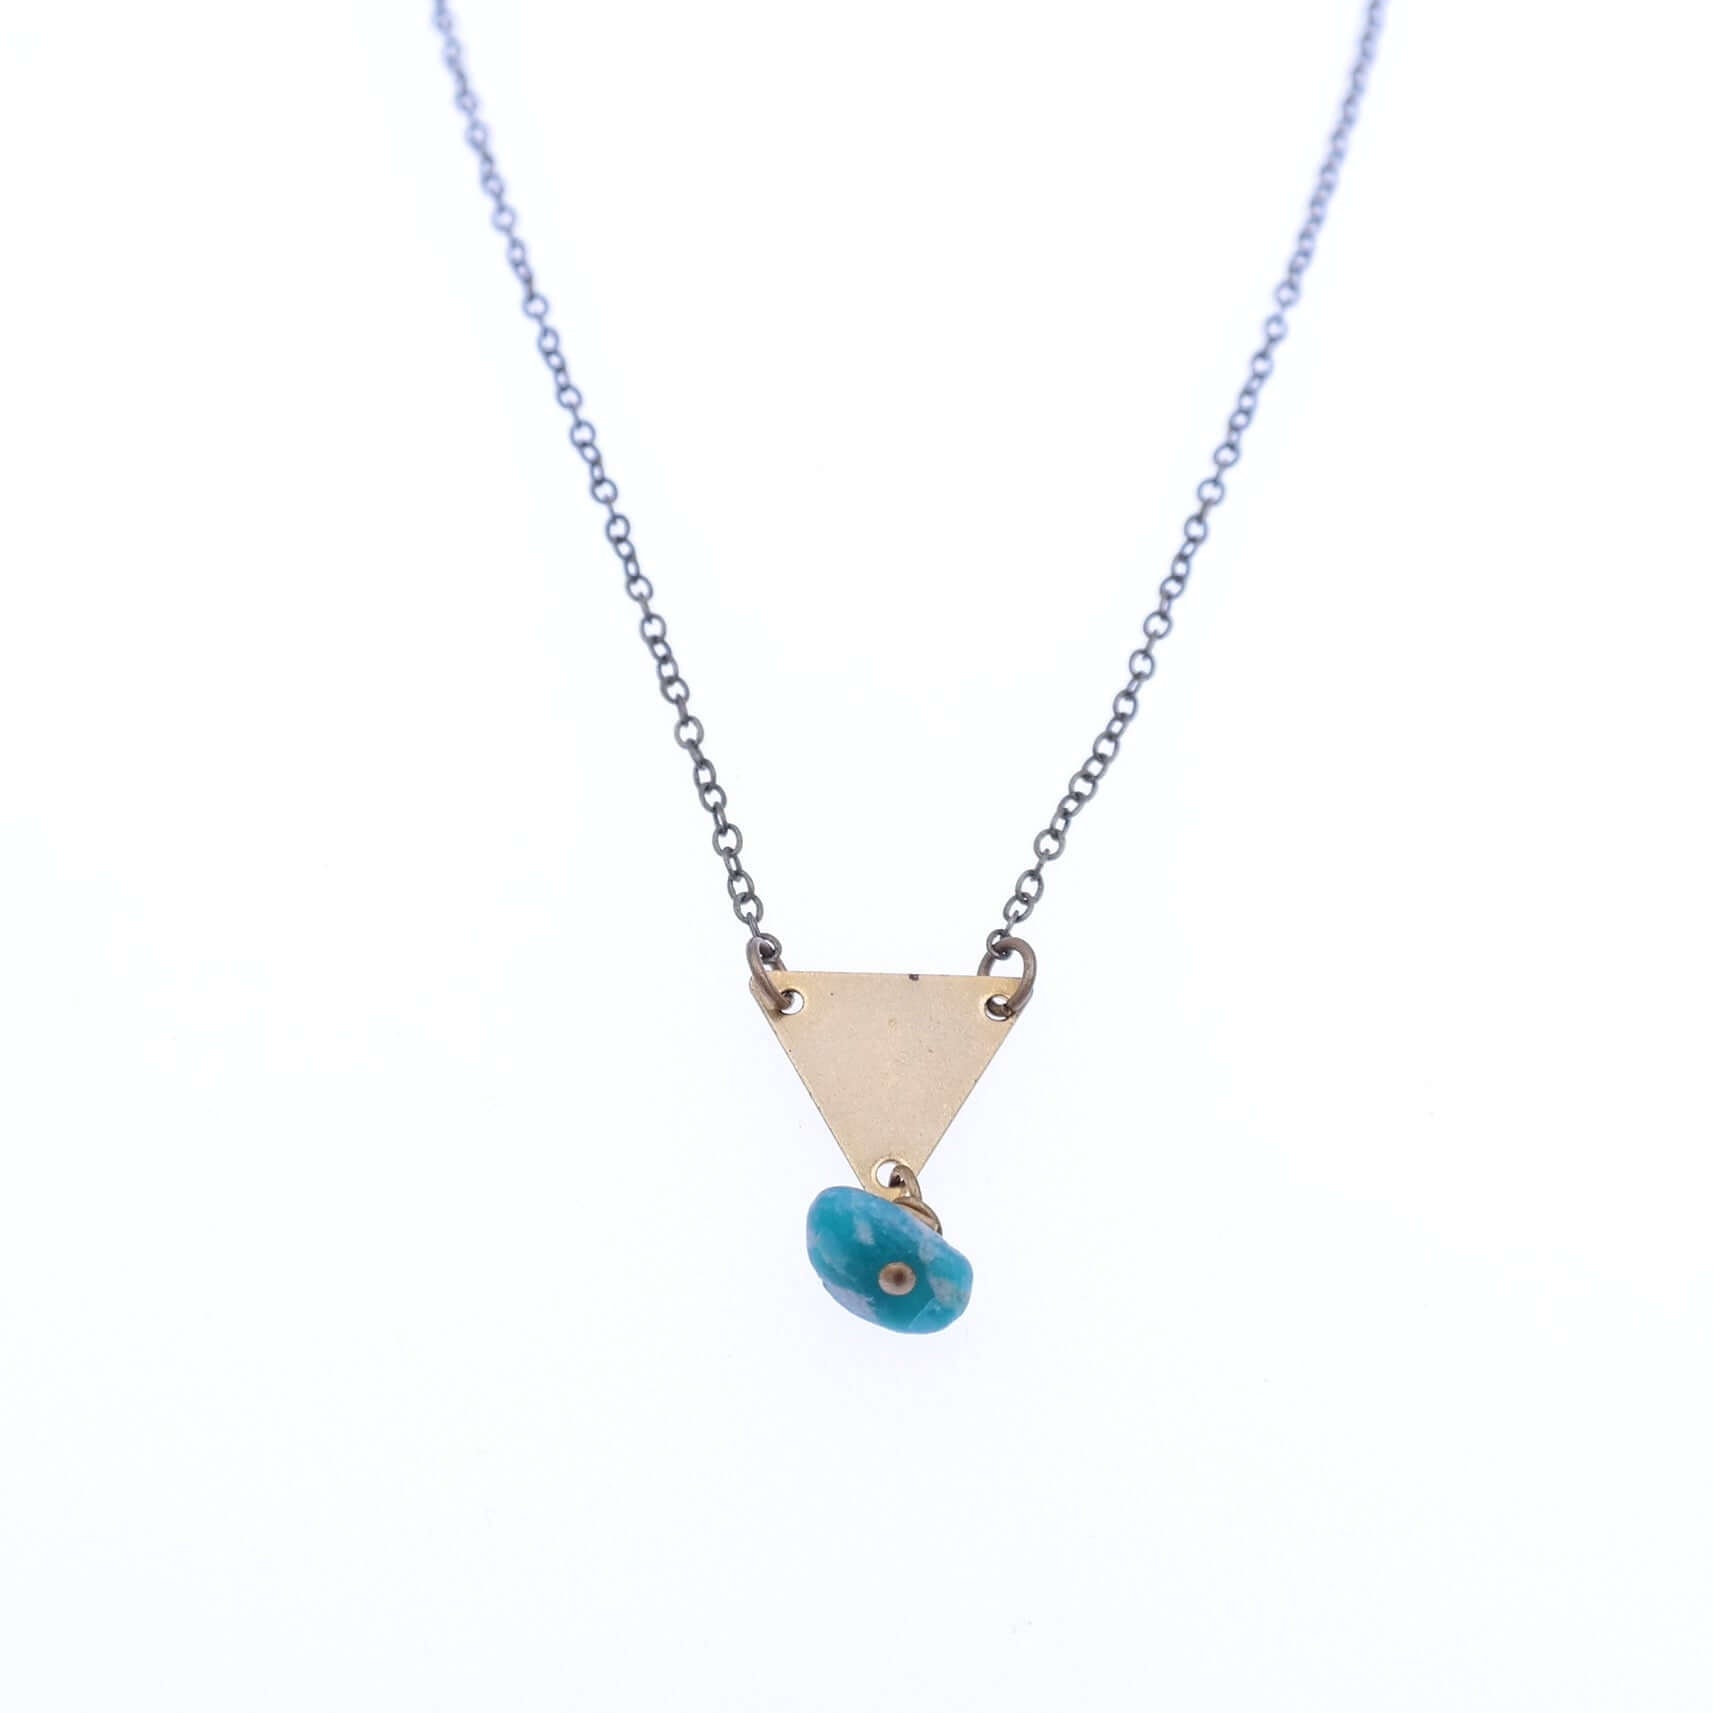 Gold Geometric Triangle Charm Necklace with Turquoise - Gypsy Soul Jewellery